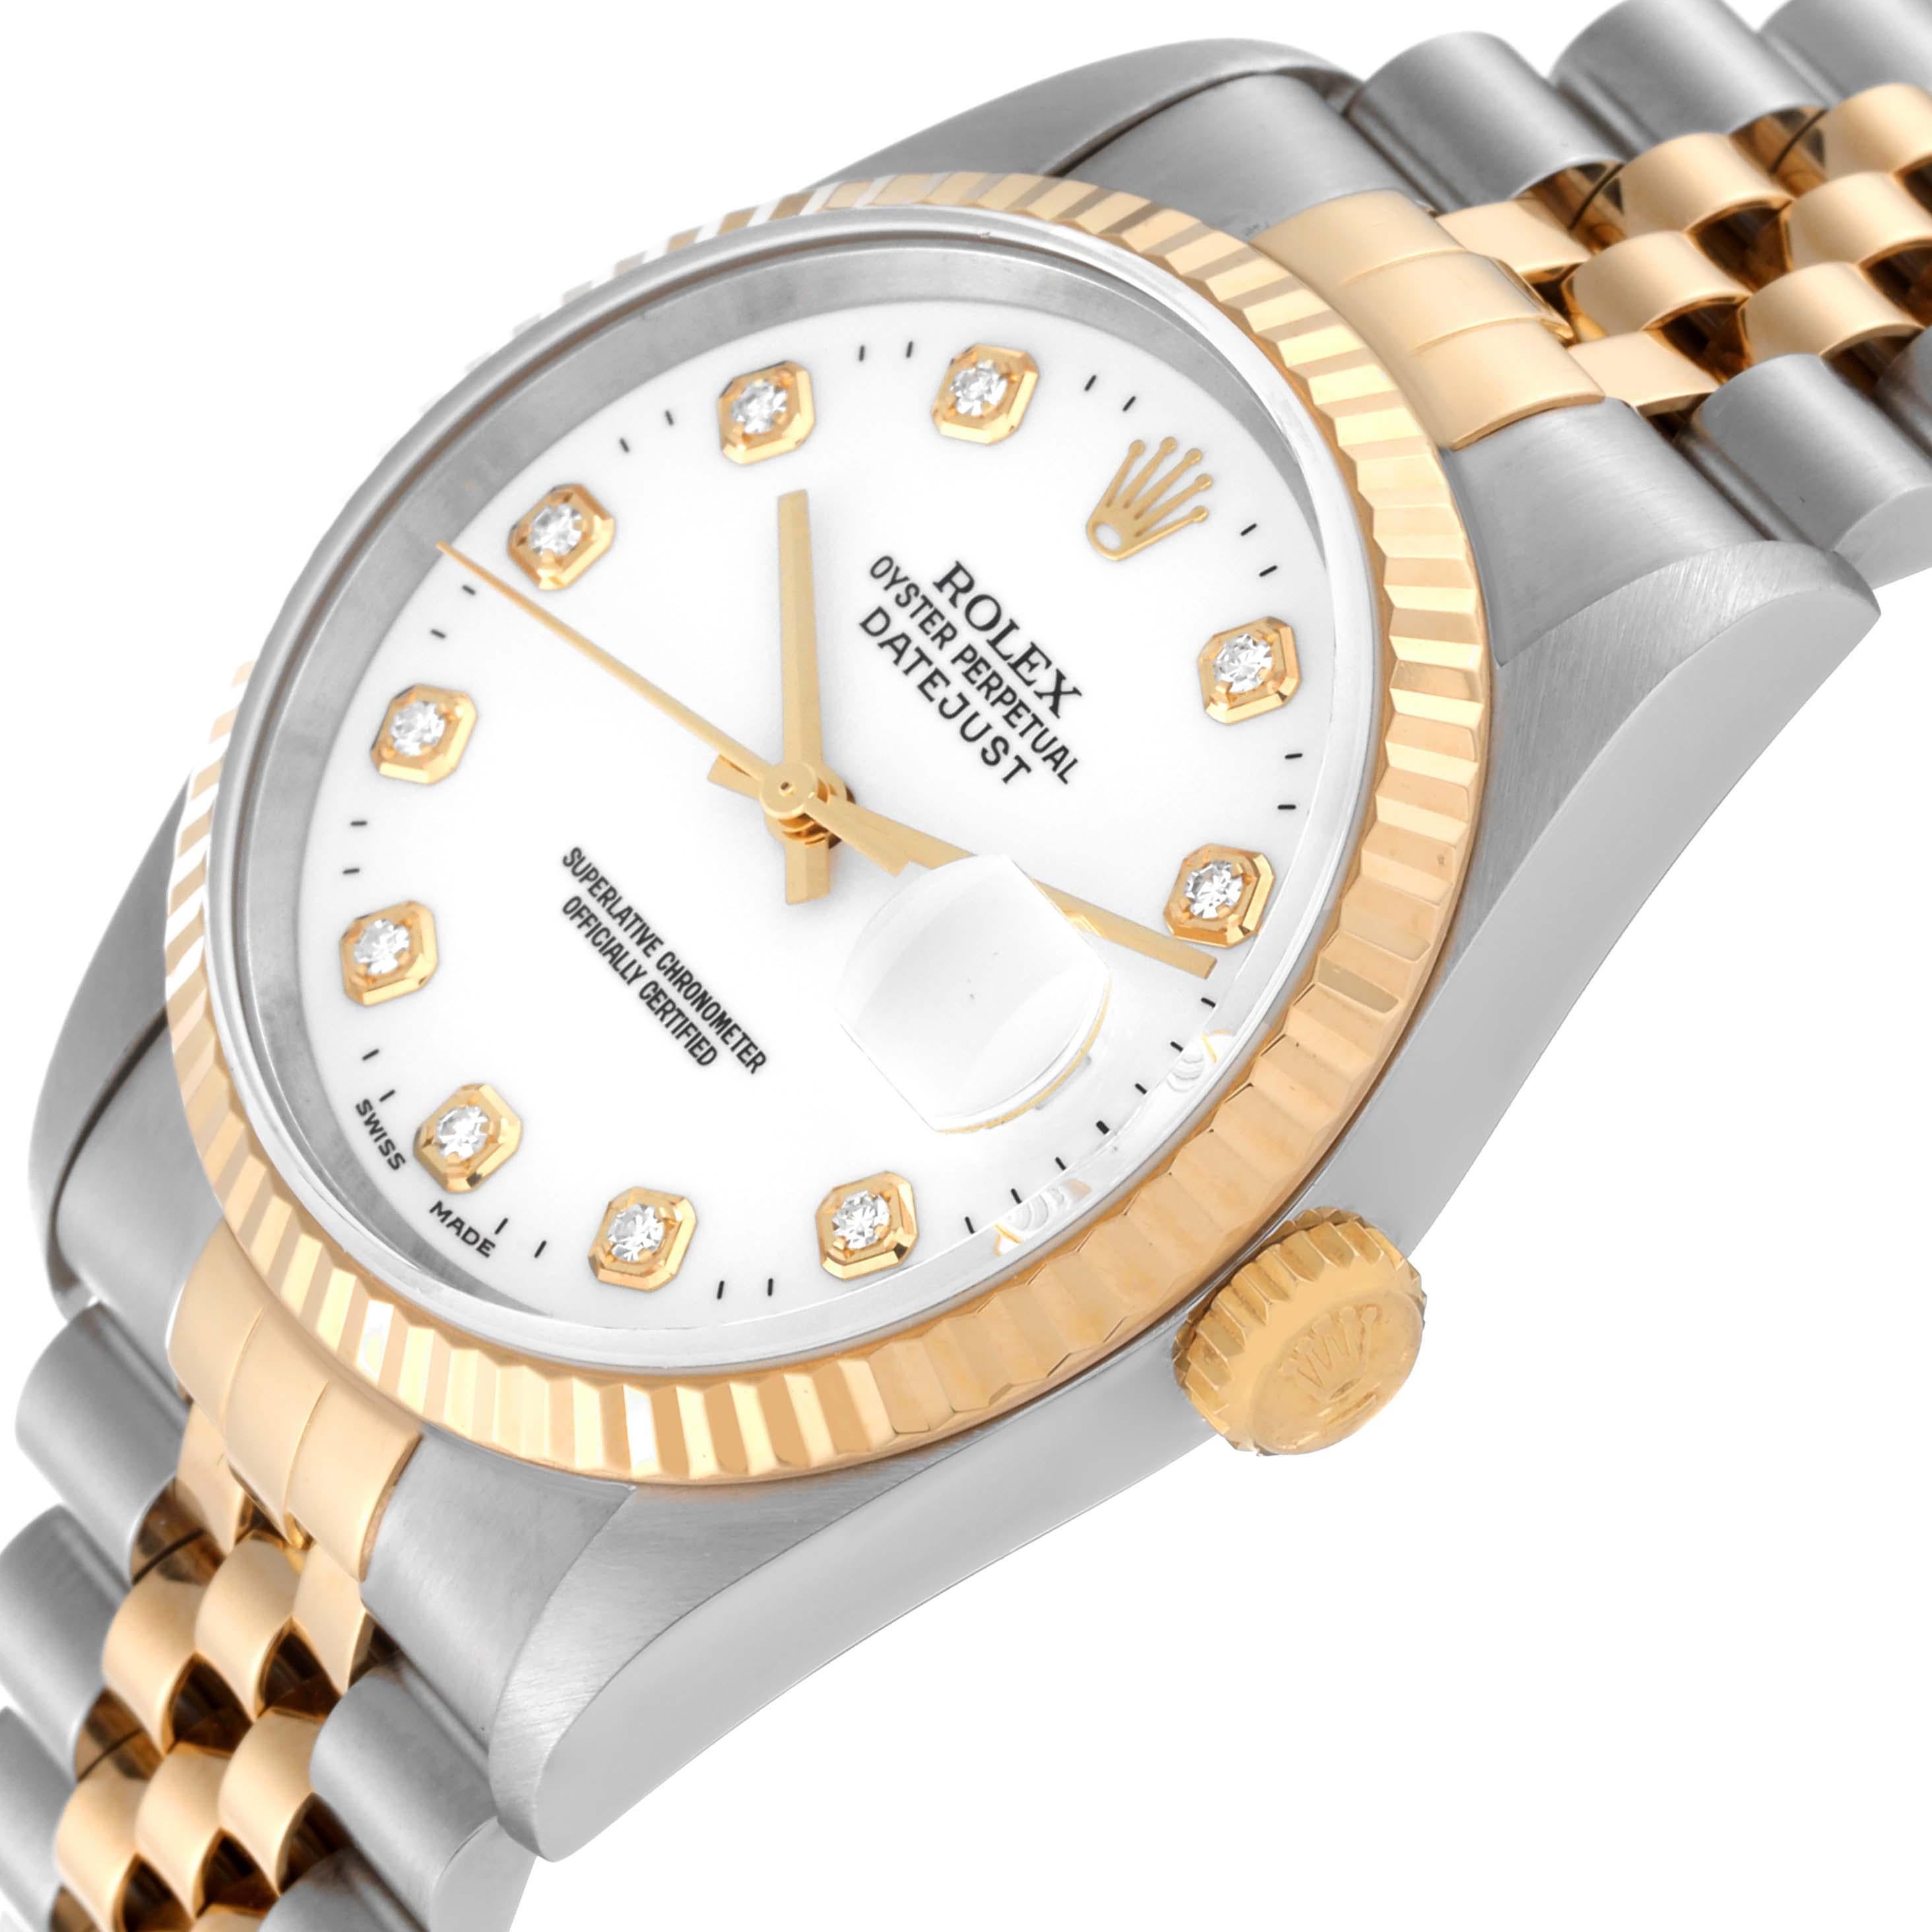  Rolex Datejust Diamond Dial Steel Yellow Gold Mens Watch 16233 Pour hommes 